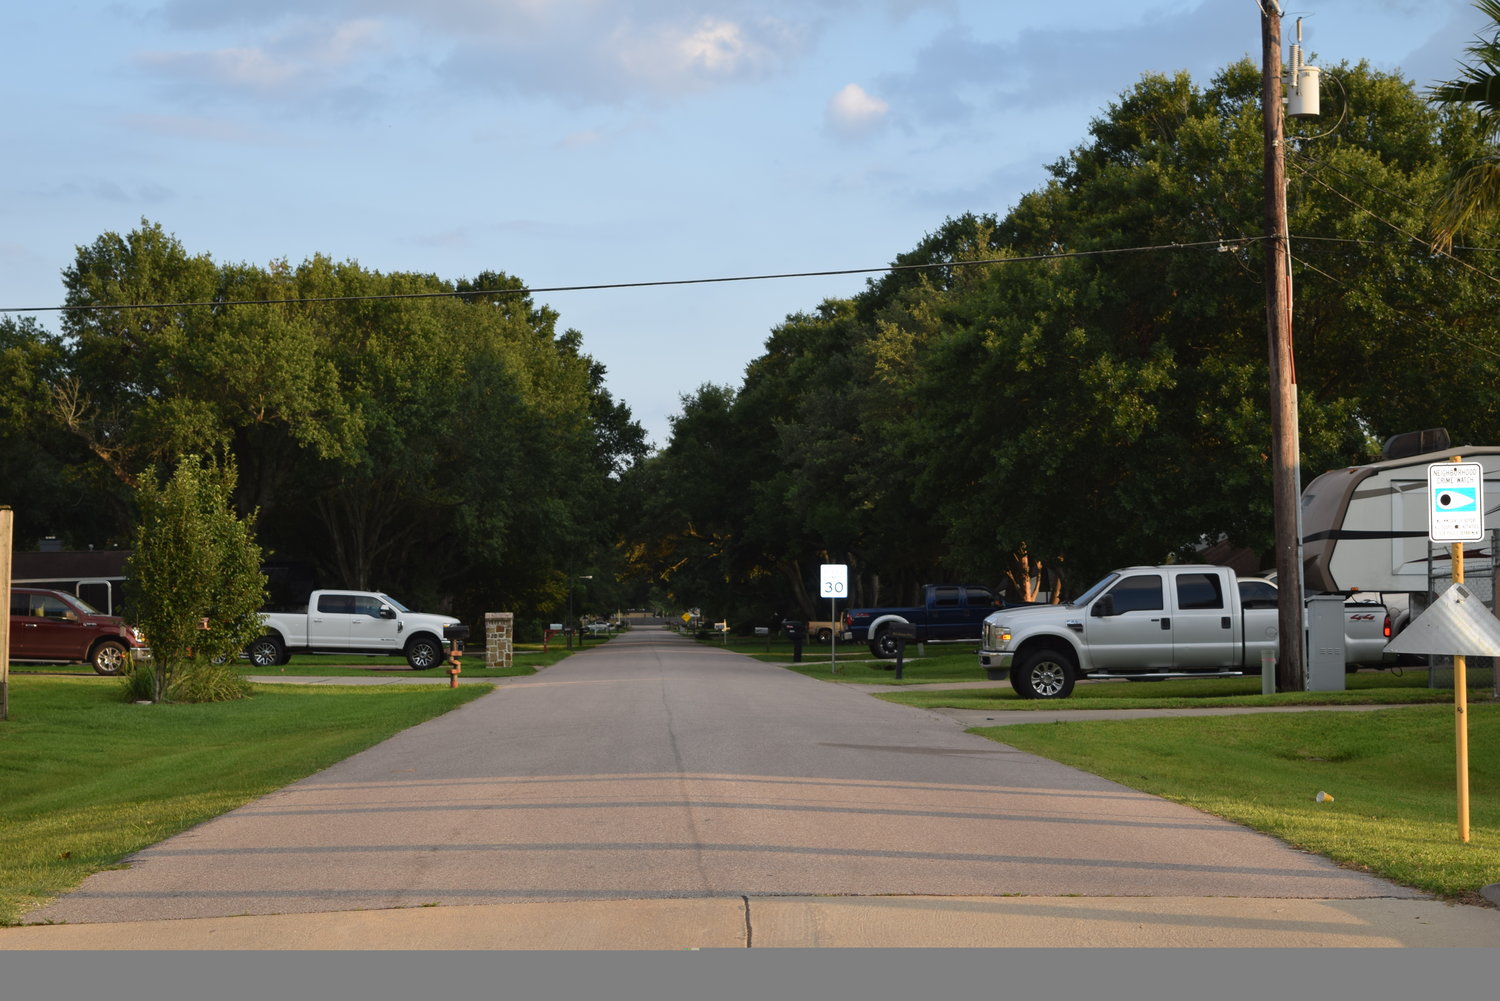 Fortuna Drive (pictured above) and Patna Drive are slated to have curb and gutter systems and other drainage improvements installed to reduce flooding on the north side of Katy in Riceland Terrace. Work is expected to be completed in 2022.